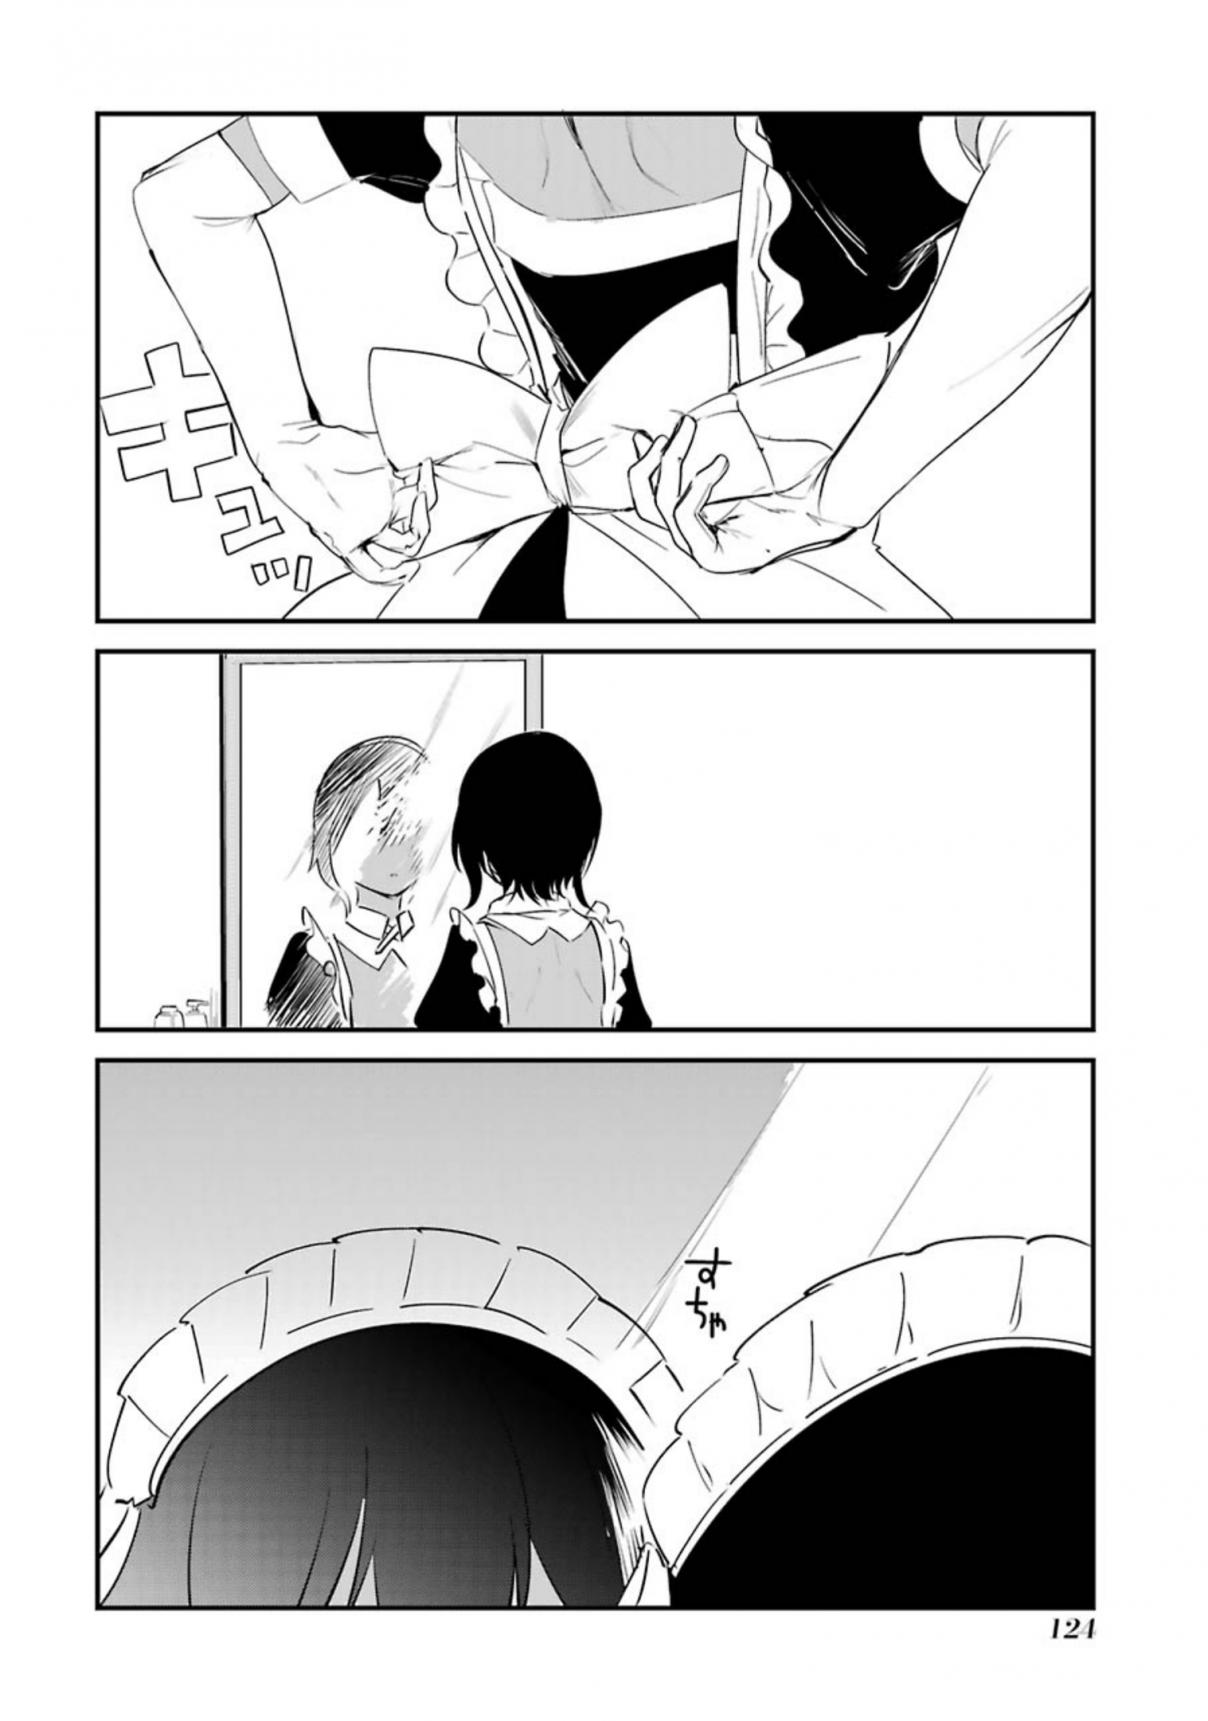 My Recently Hired Maid is Suspicious Vol. 1 Ch. 4.1